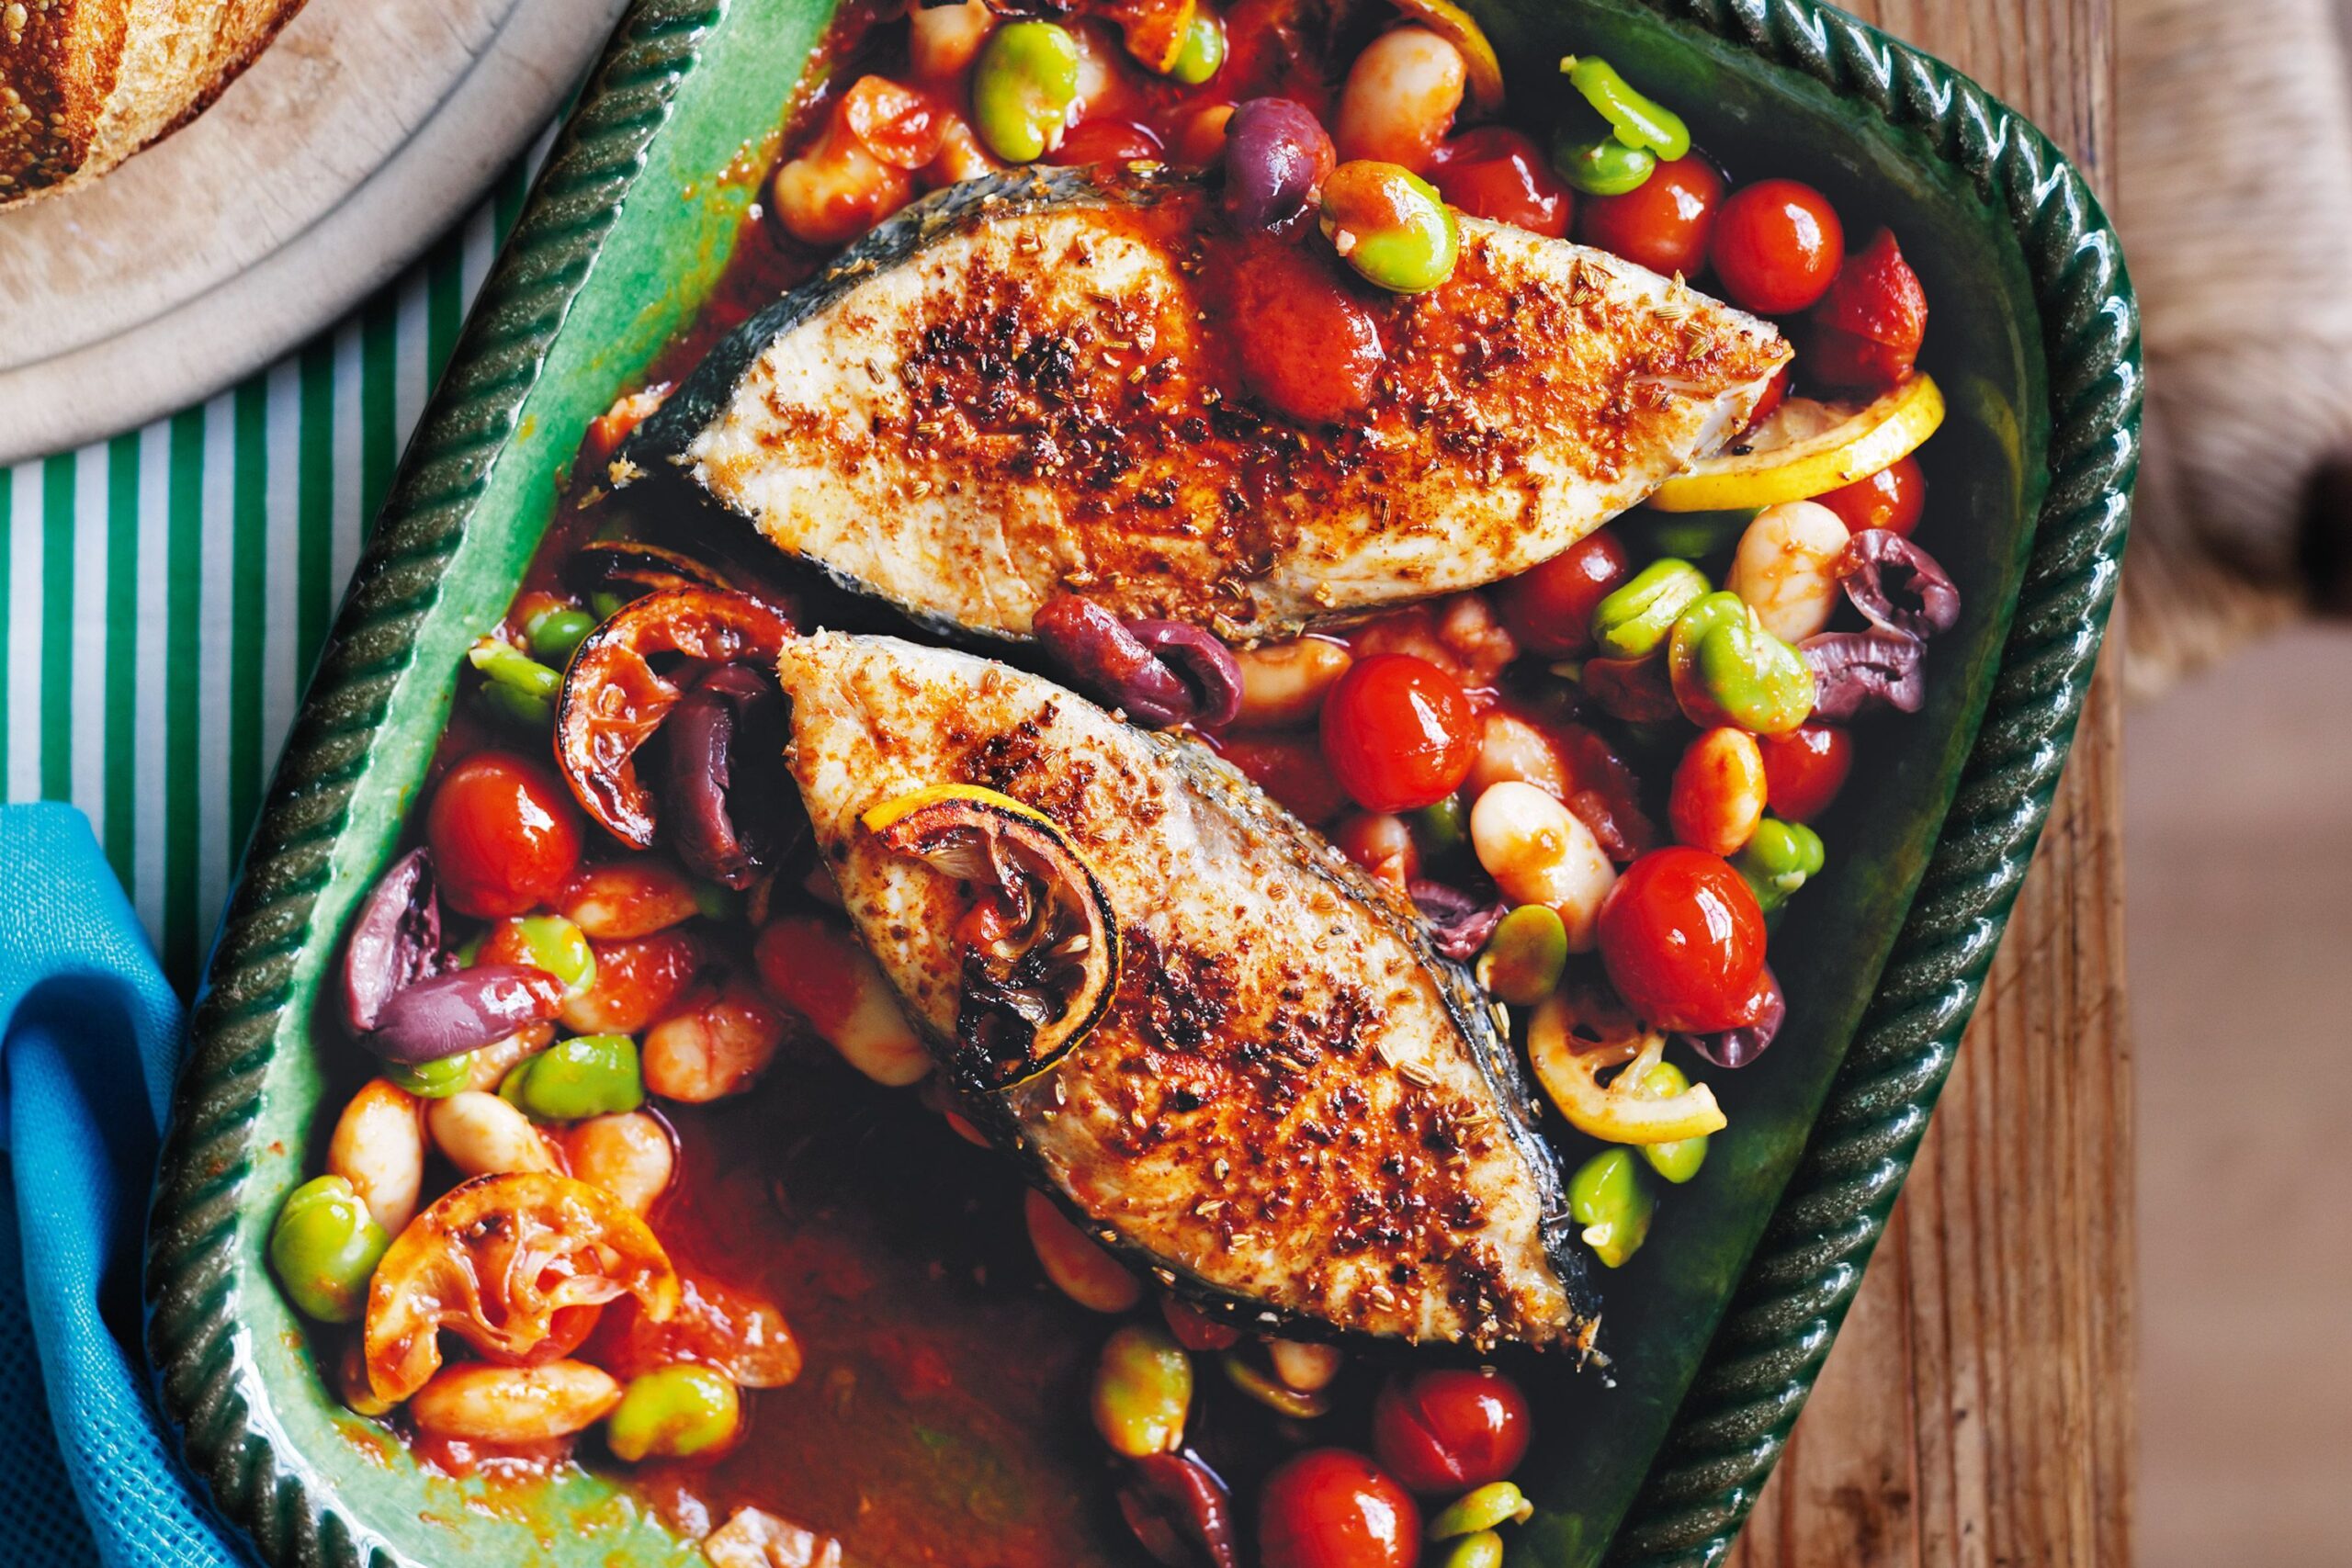 vbaked-fish-with-tomatoes-beans-and-olives-84217-1